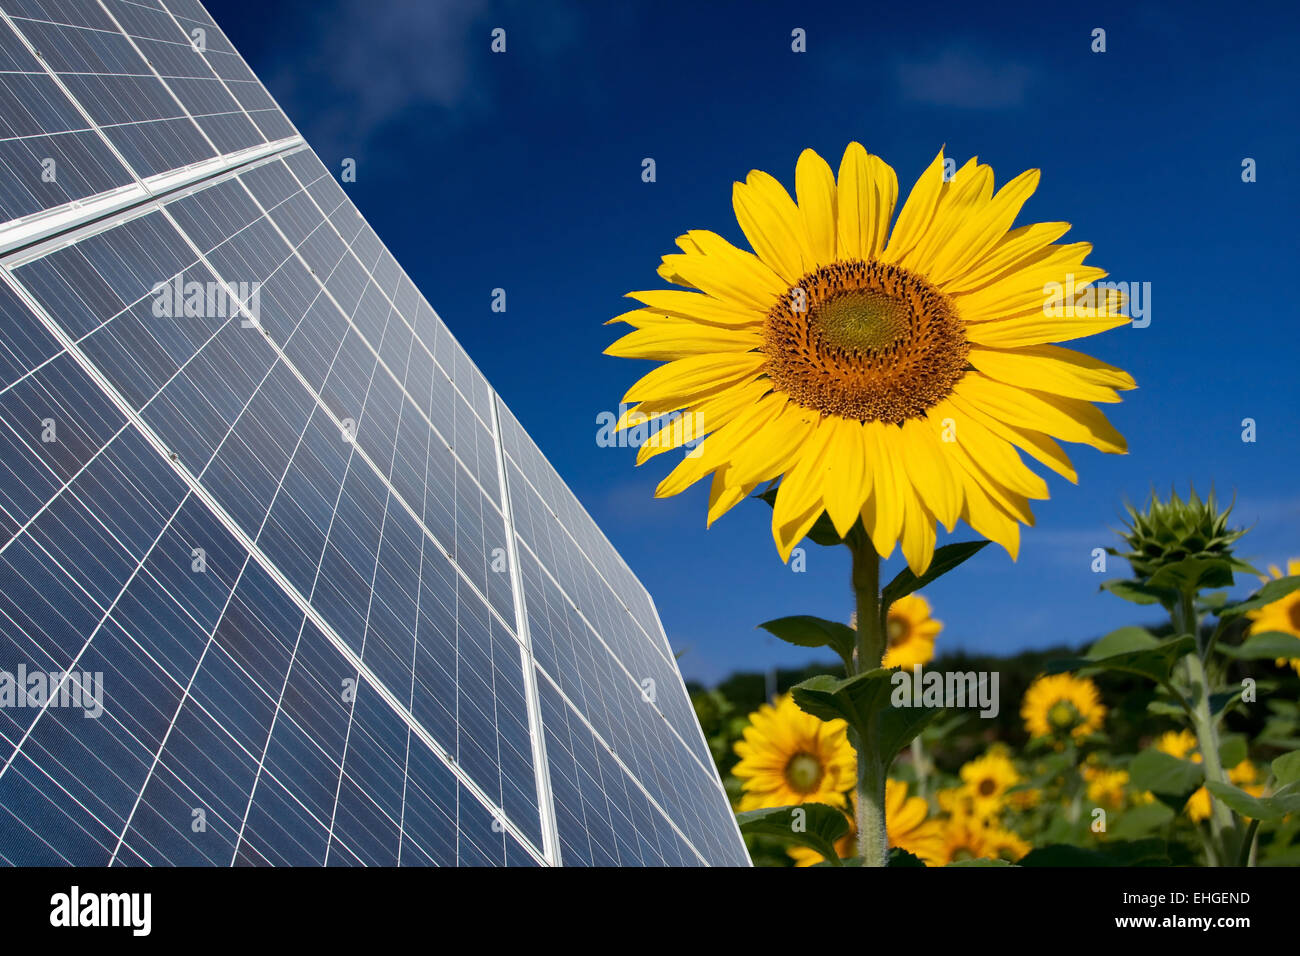 Sunflowers and solar panel Stock Photo